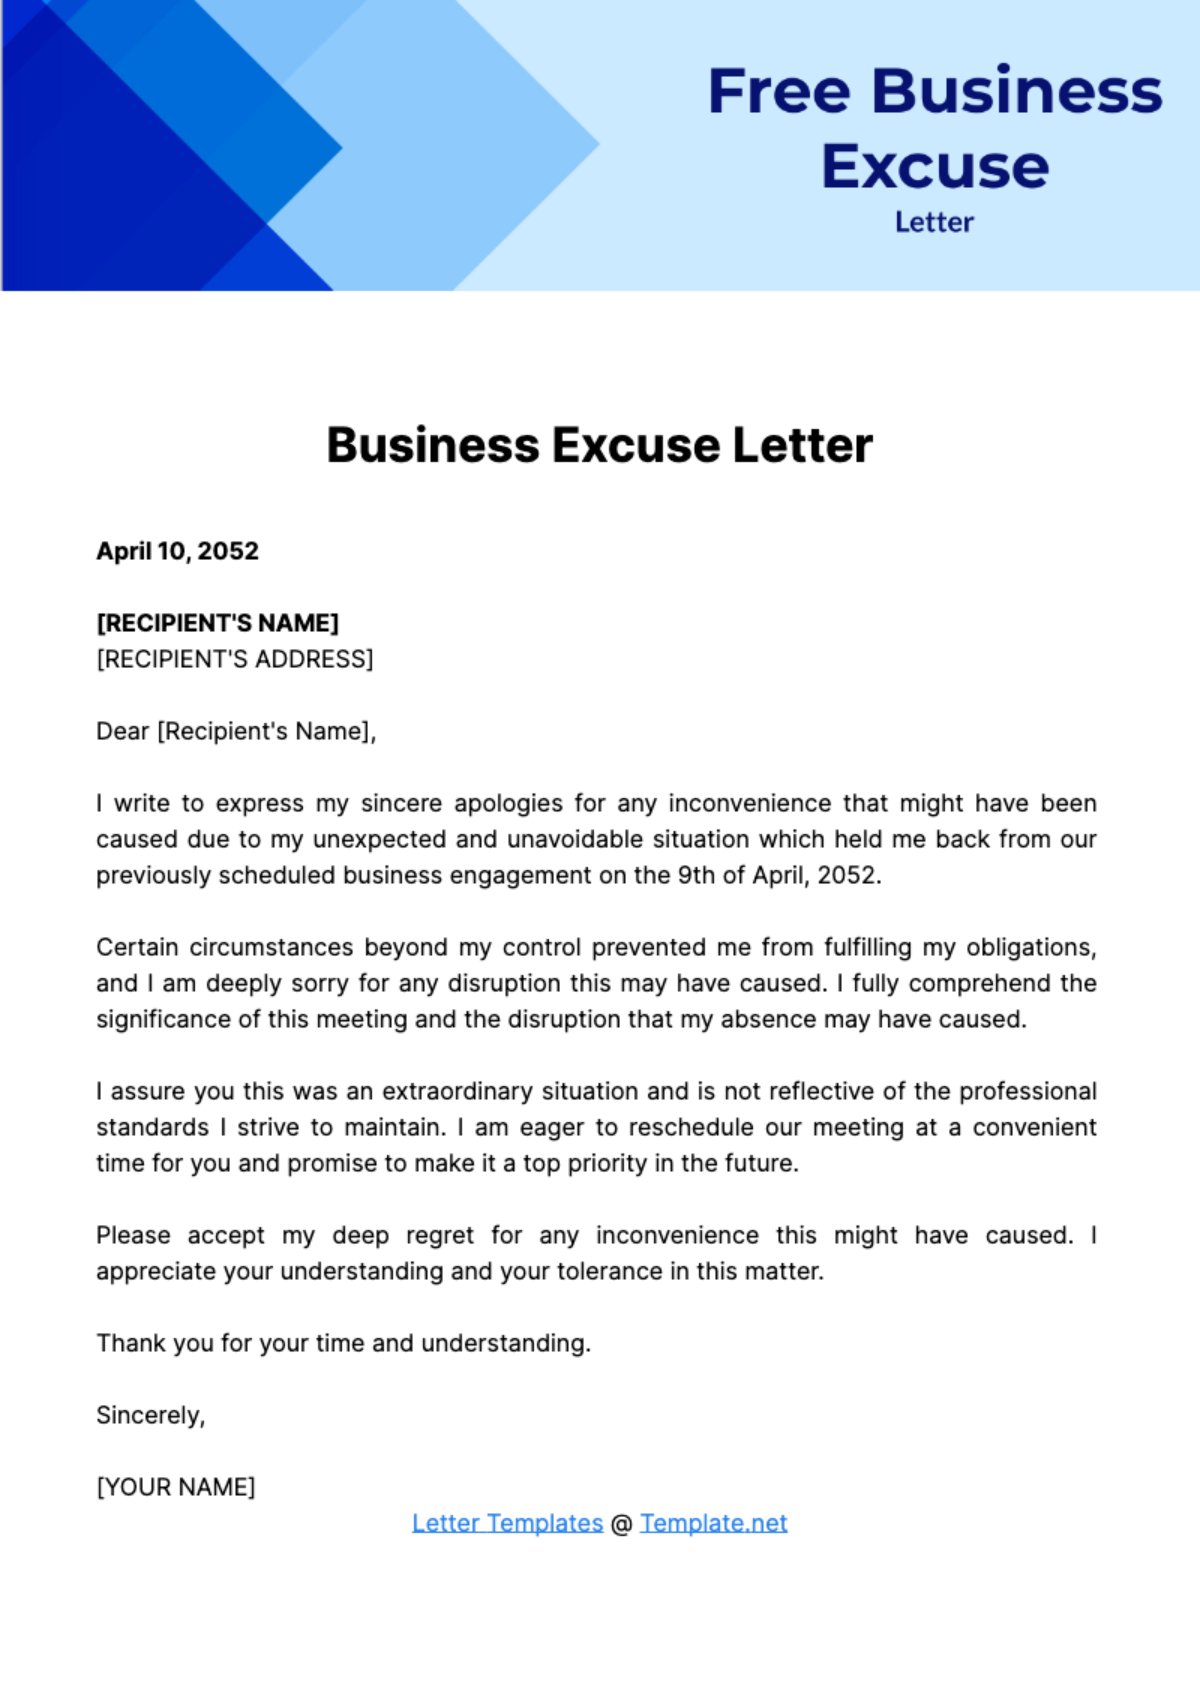 Free Business Excuse Letter Template